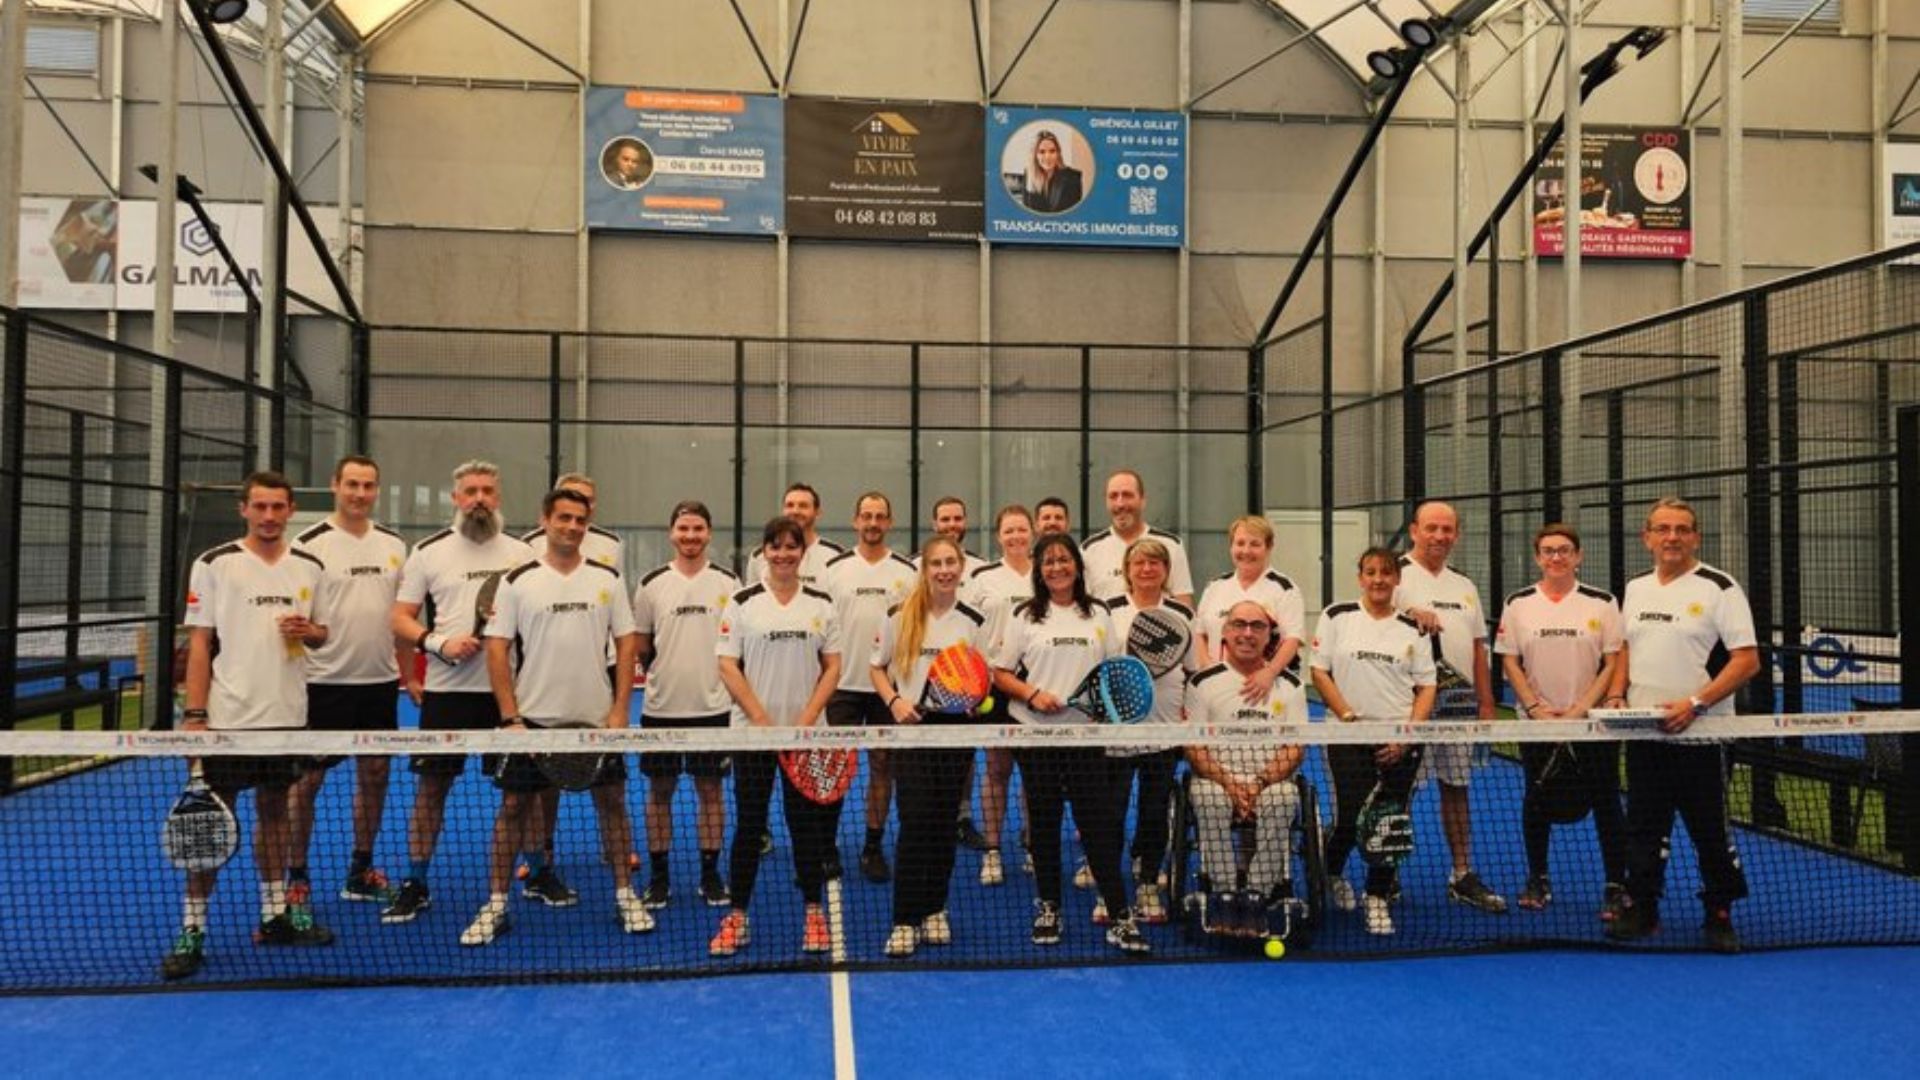 AREA Padel Club de Narbonne collects 3.000 euros during the 24 hours of padel